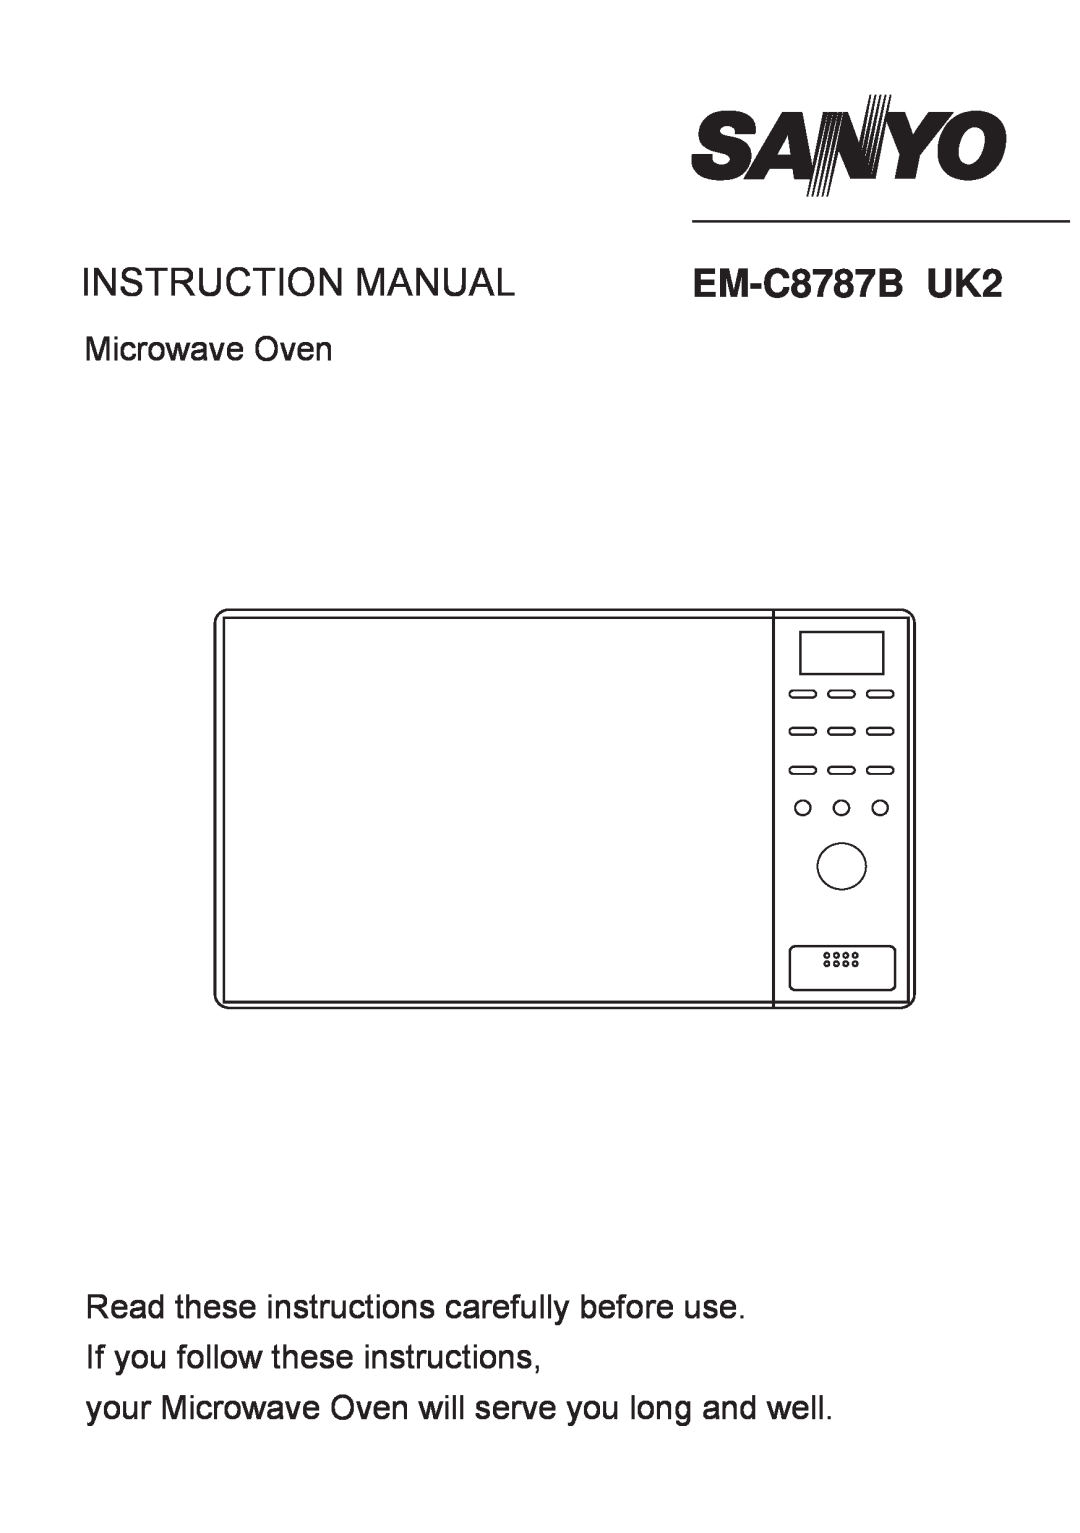 Sanyo em-c887B instruction manual your Microwave Oven will serve you long and well, Instruction Manual, EM-C8787B UK2 